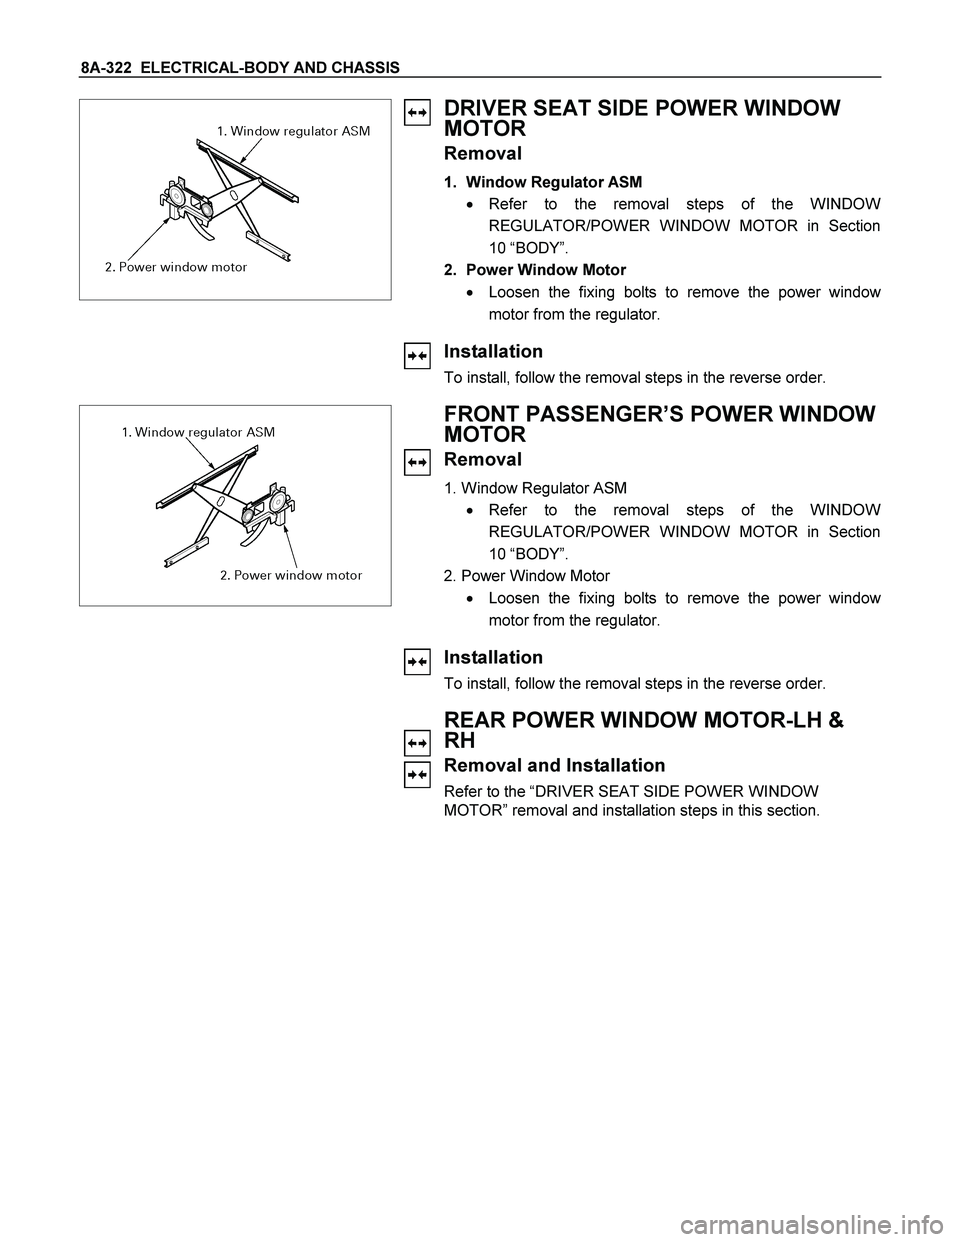 ISUZU TF SERIES 2004  Workshop Manual 8A-322  ELECTRICAL-BODY AND CHASSIS 
 
 
DRIVER SEAT SIDE POWER WINDOW 
MOTOR 
Removal 
1.  Window Regulator ASM 
 Refer to the removal steps of the WINDOW
REGULATOR/POWER WINDOW MOTOR in Section
10 